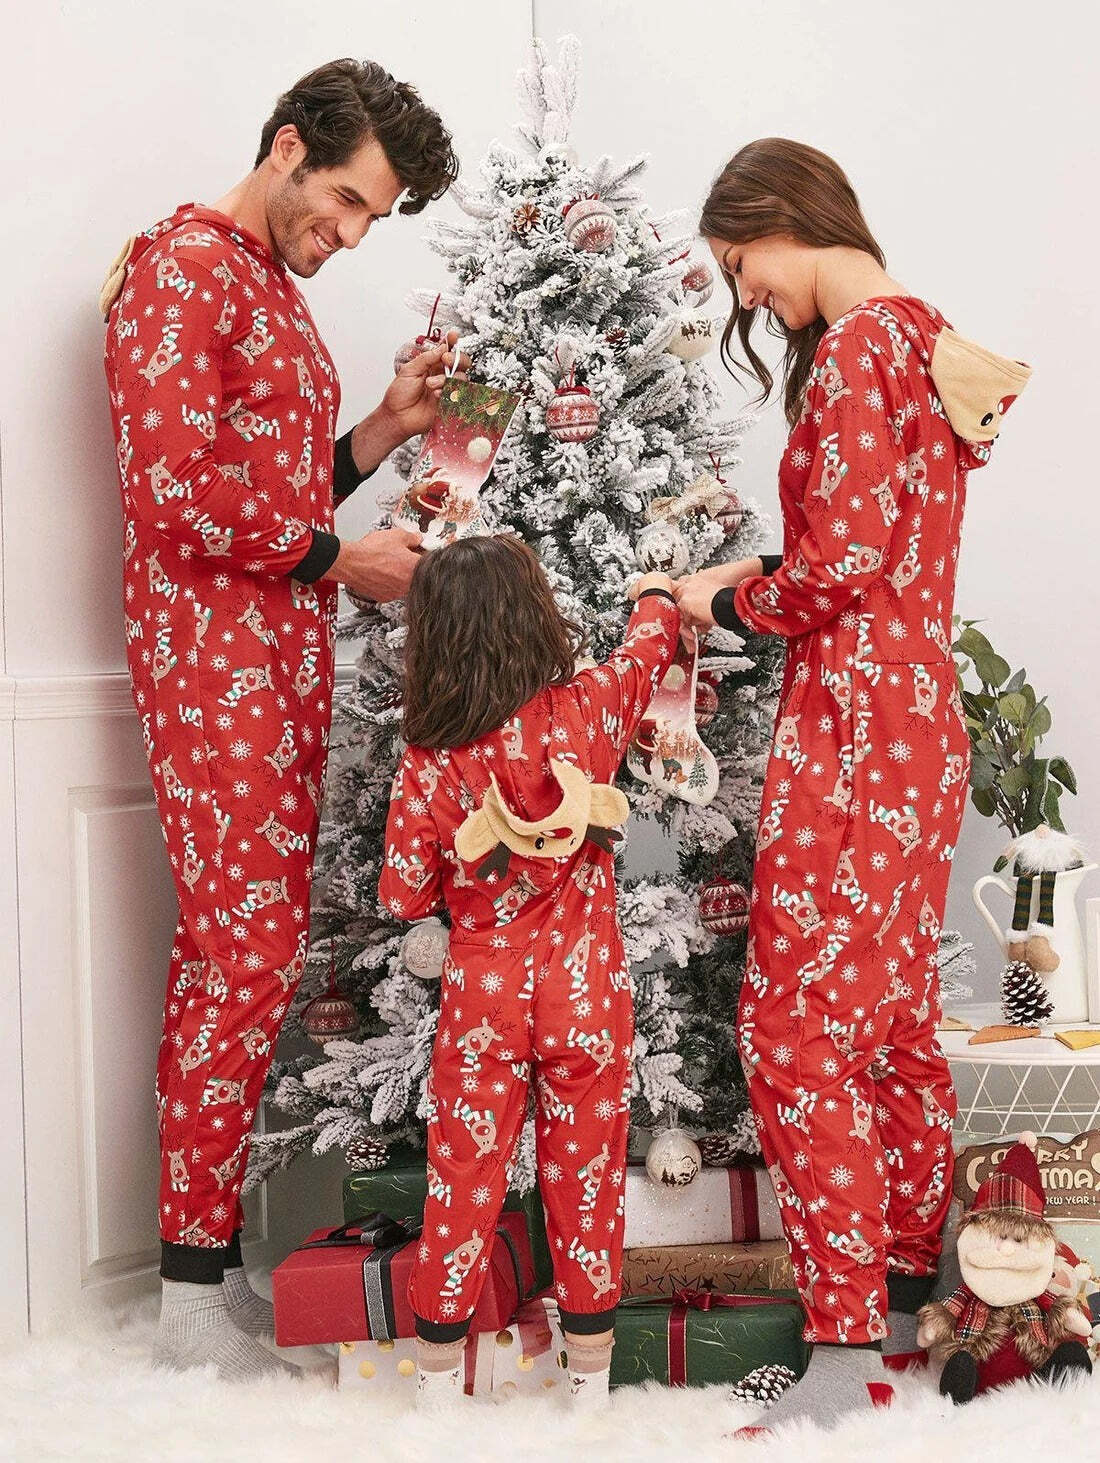 Multicolor Holiday Hooded Family Matching Onesies Pajamas